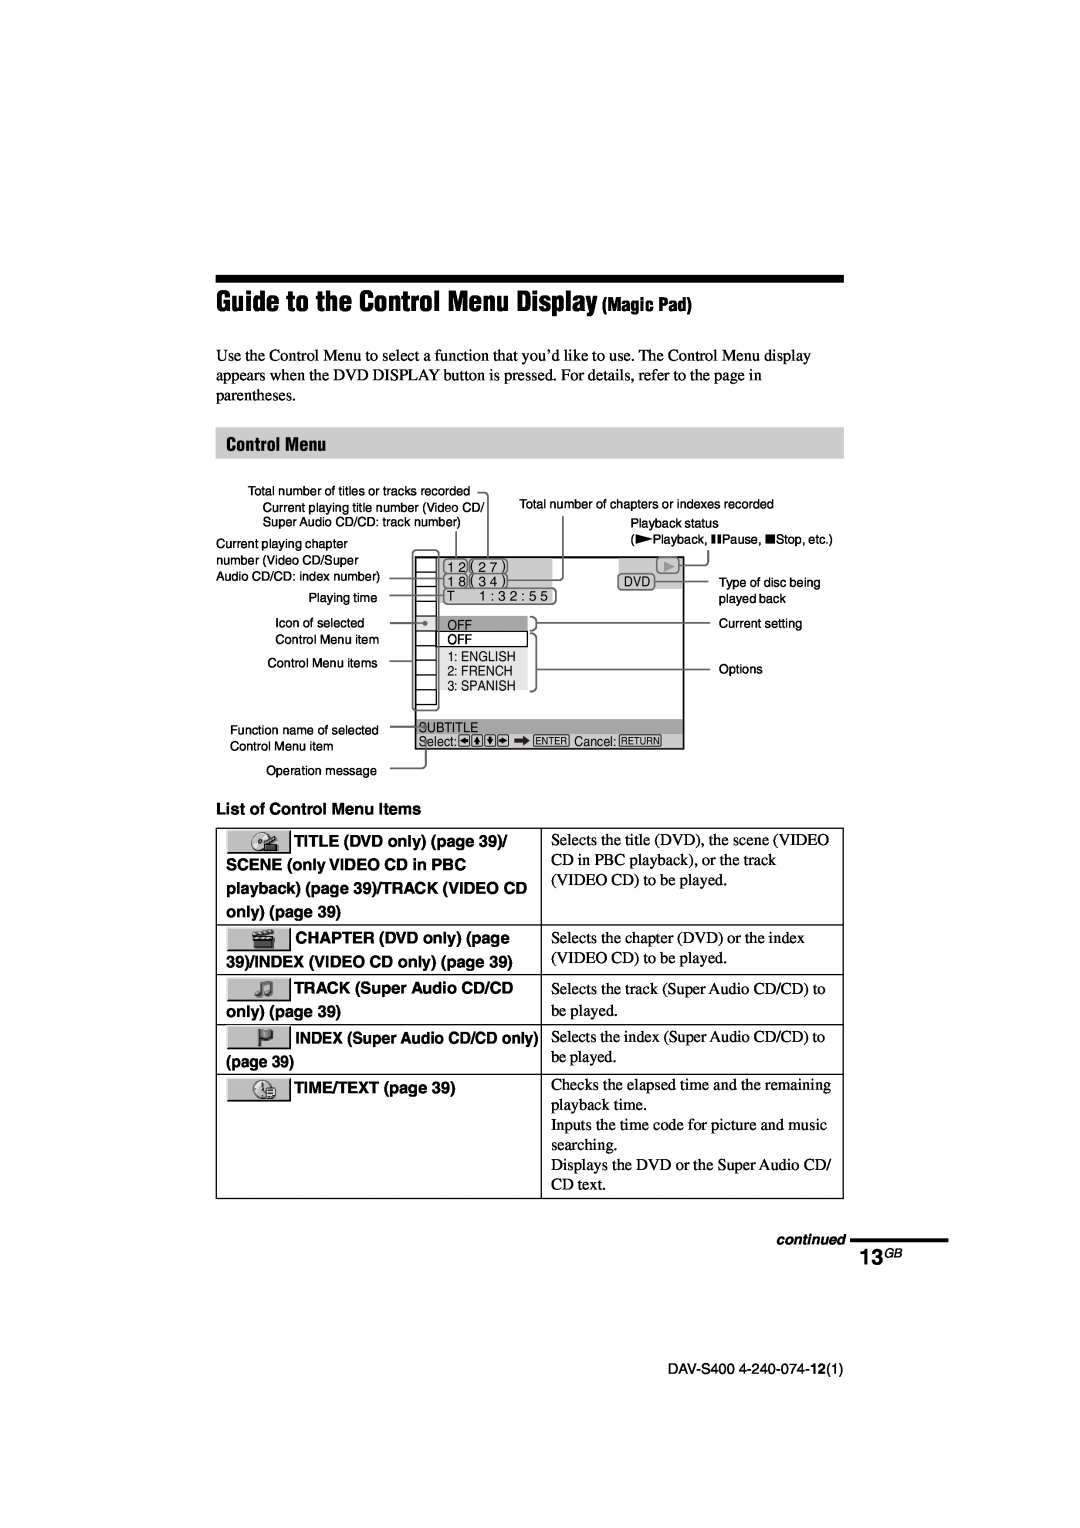 Sony DAV-S400 manual Guide to the Control Menu Display Magic Pad, 13GB, List of Control Menu Items, TITLE DVD only page 